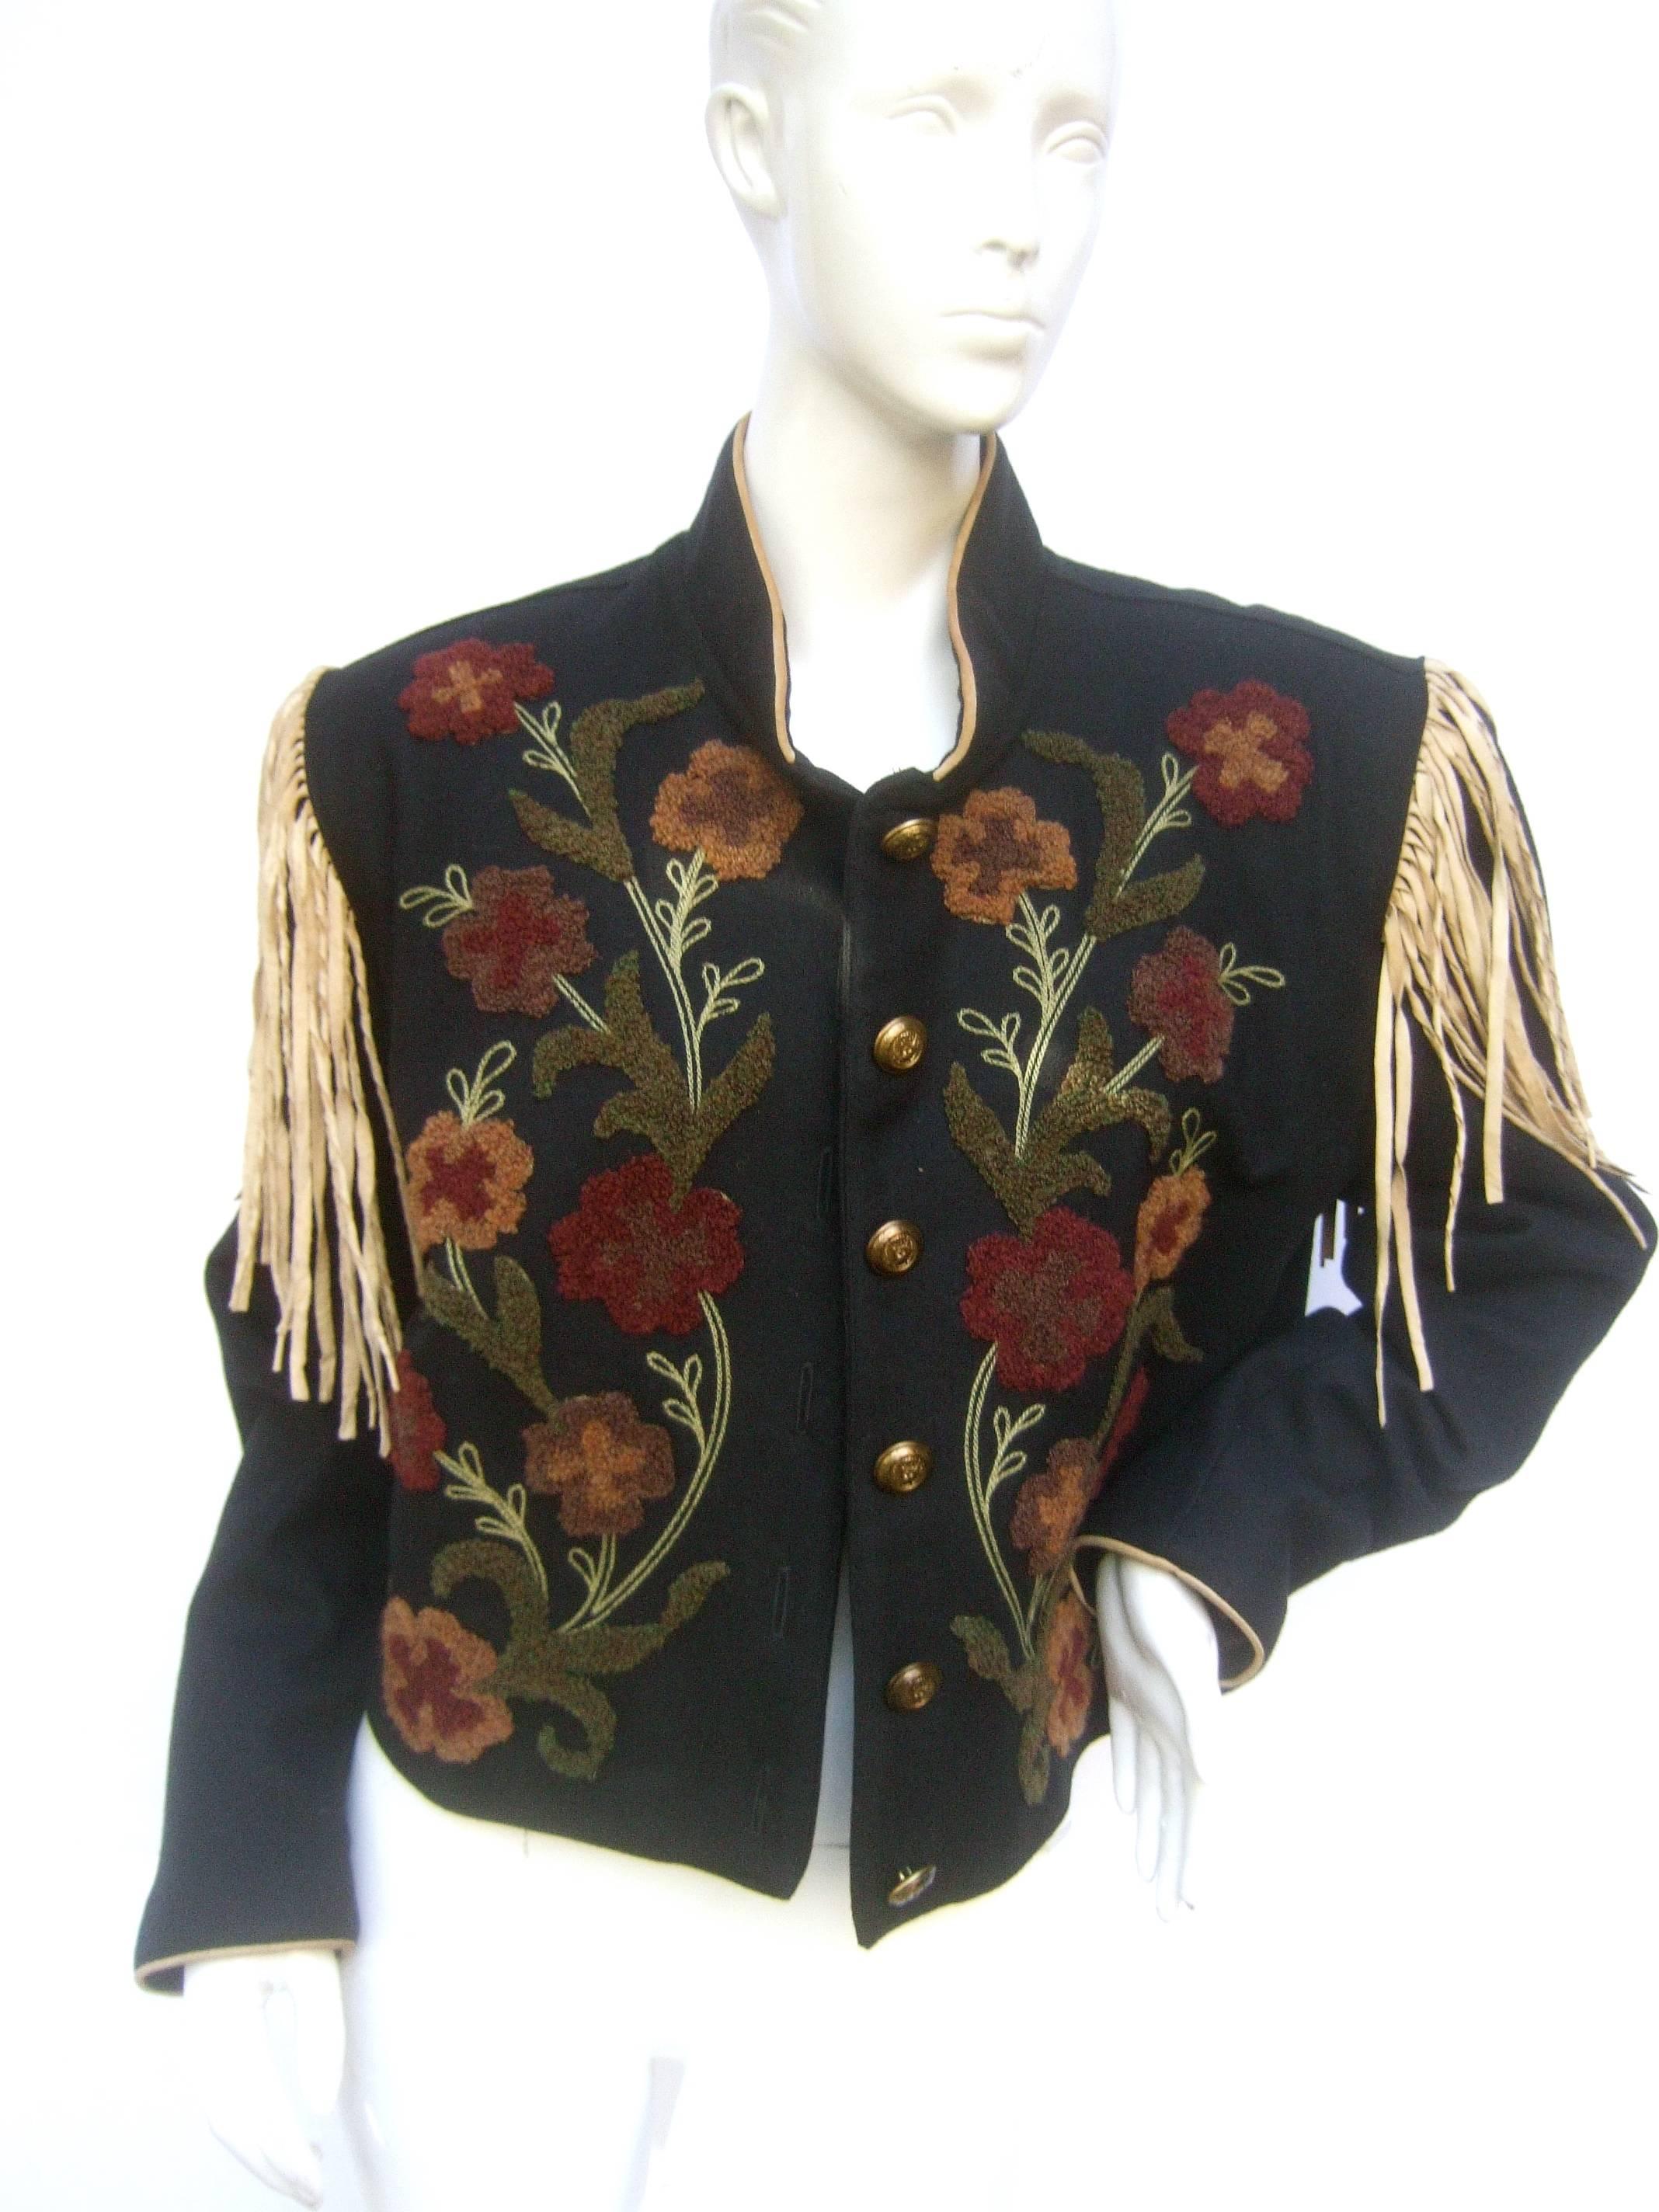 Southwestern black wool applique fringe jacket c 1990s
The unique Southwestern style wool jacket 
is designed with a garden of applique autumn  
earth tone flowers on the front

The shoulders are embellished with long
tan suede fringe tassels.